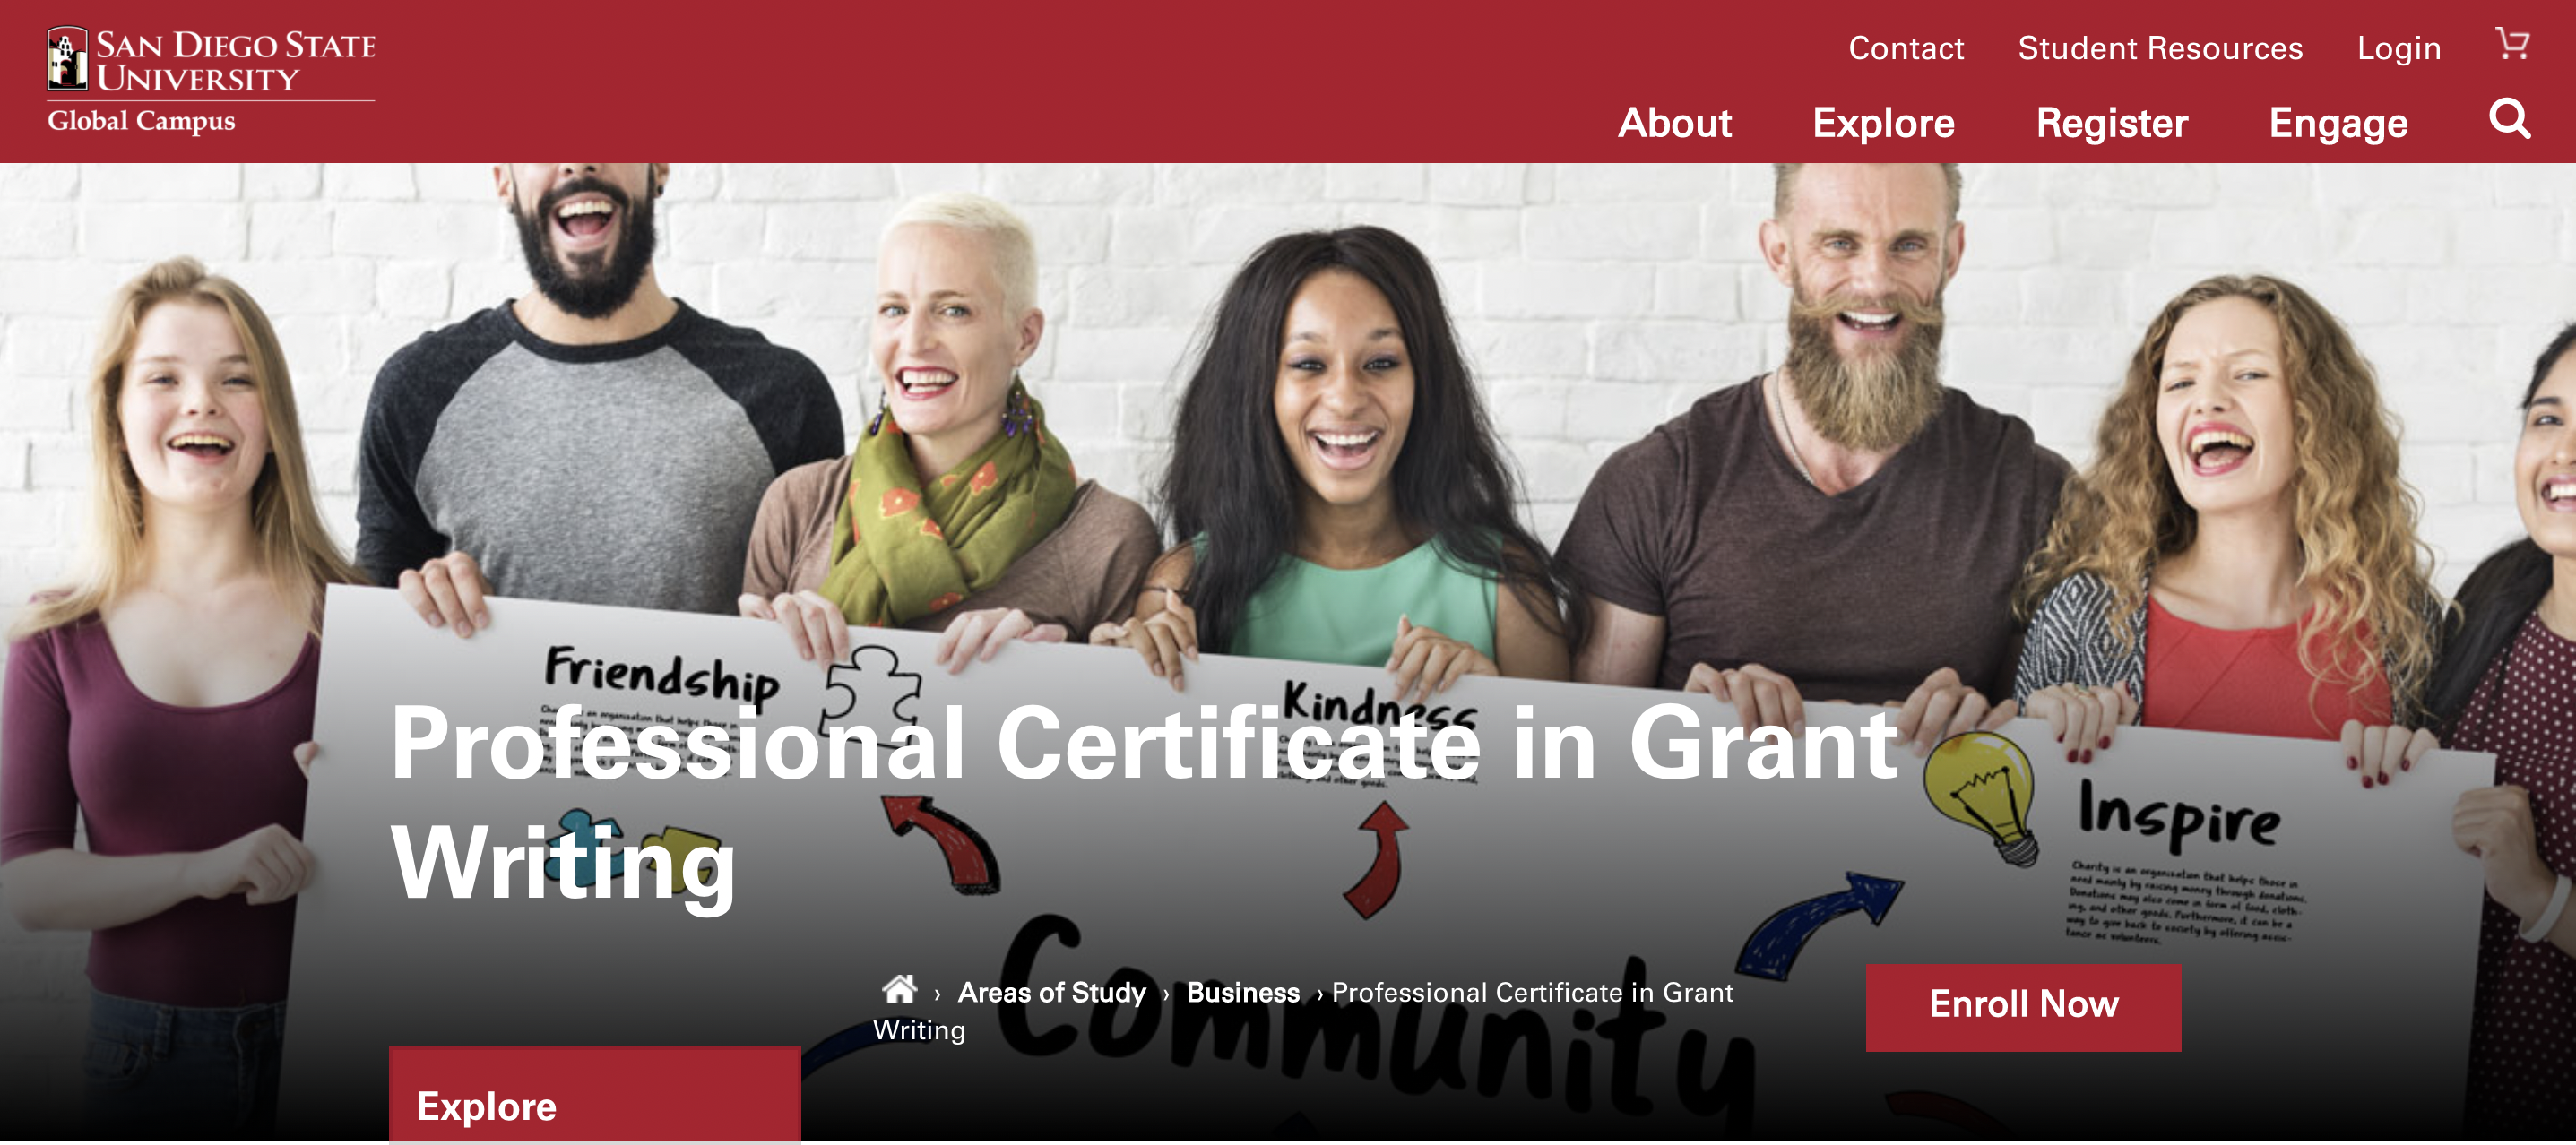 Professional Certificate in Grant Writing (San Diego State University)